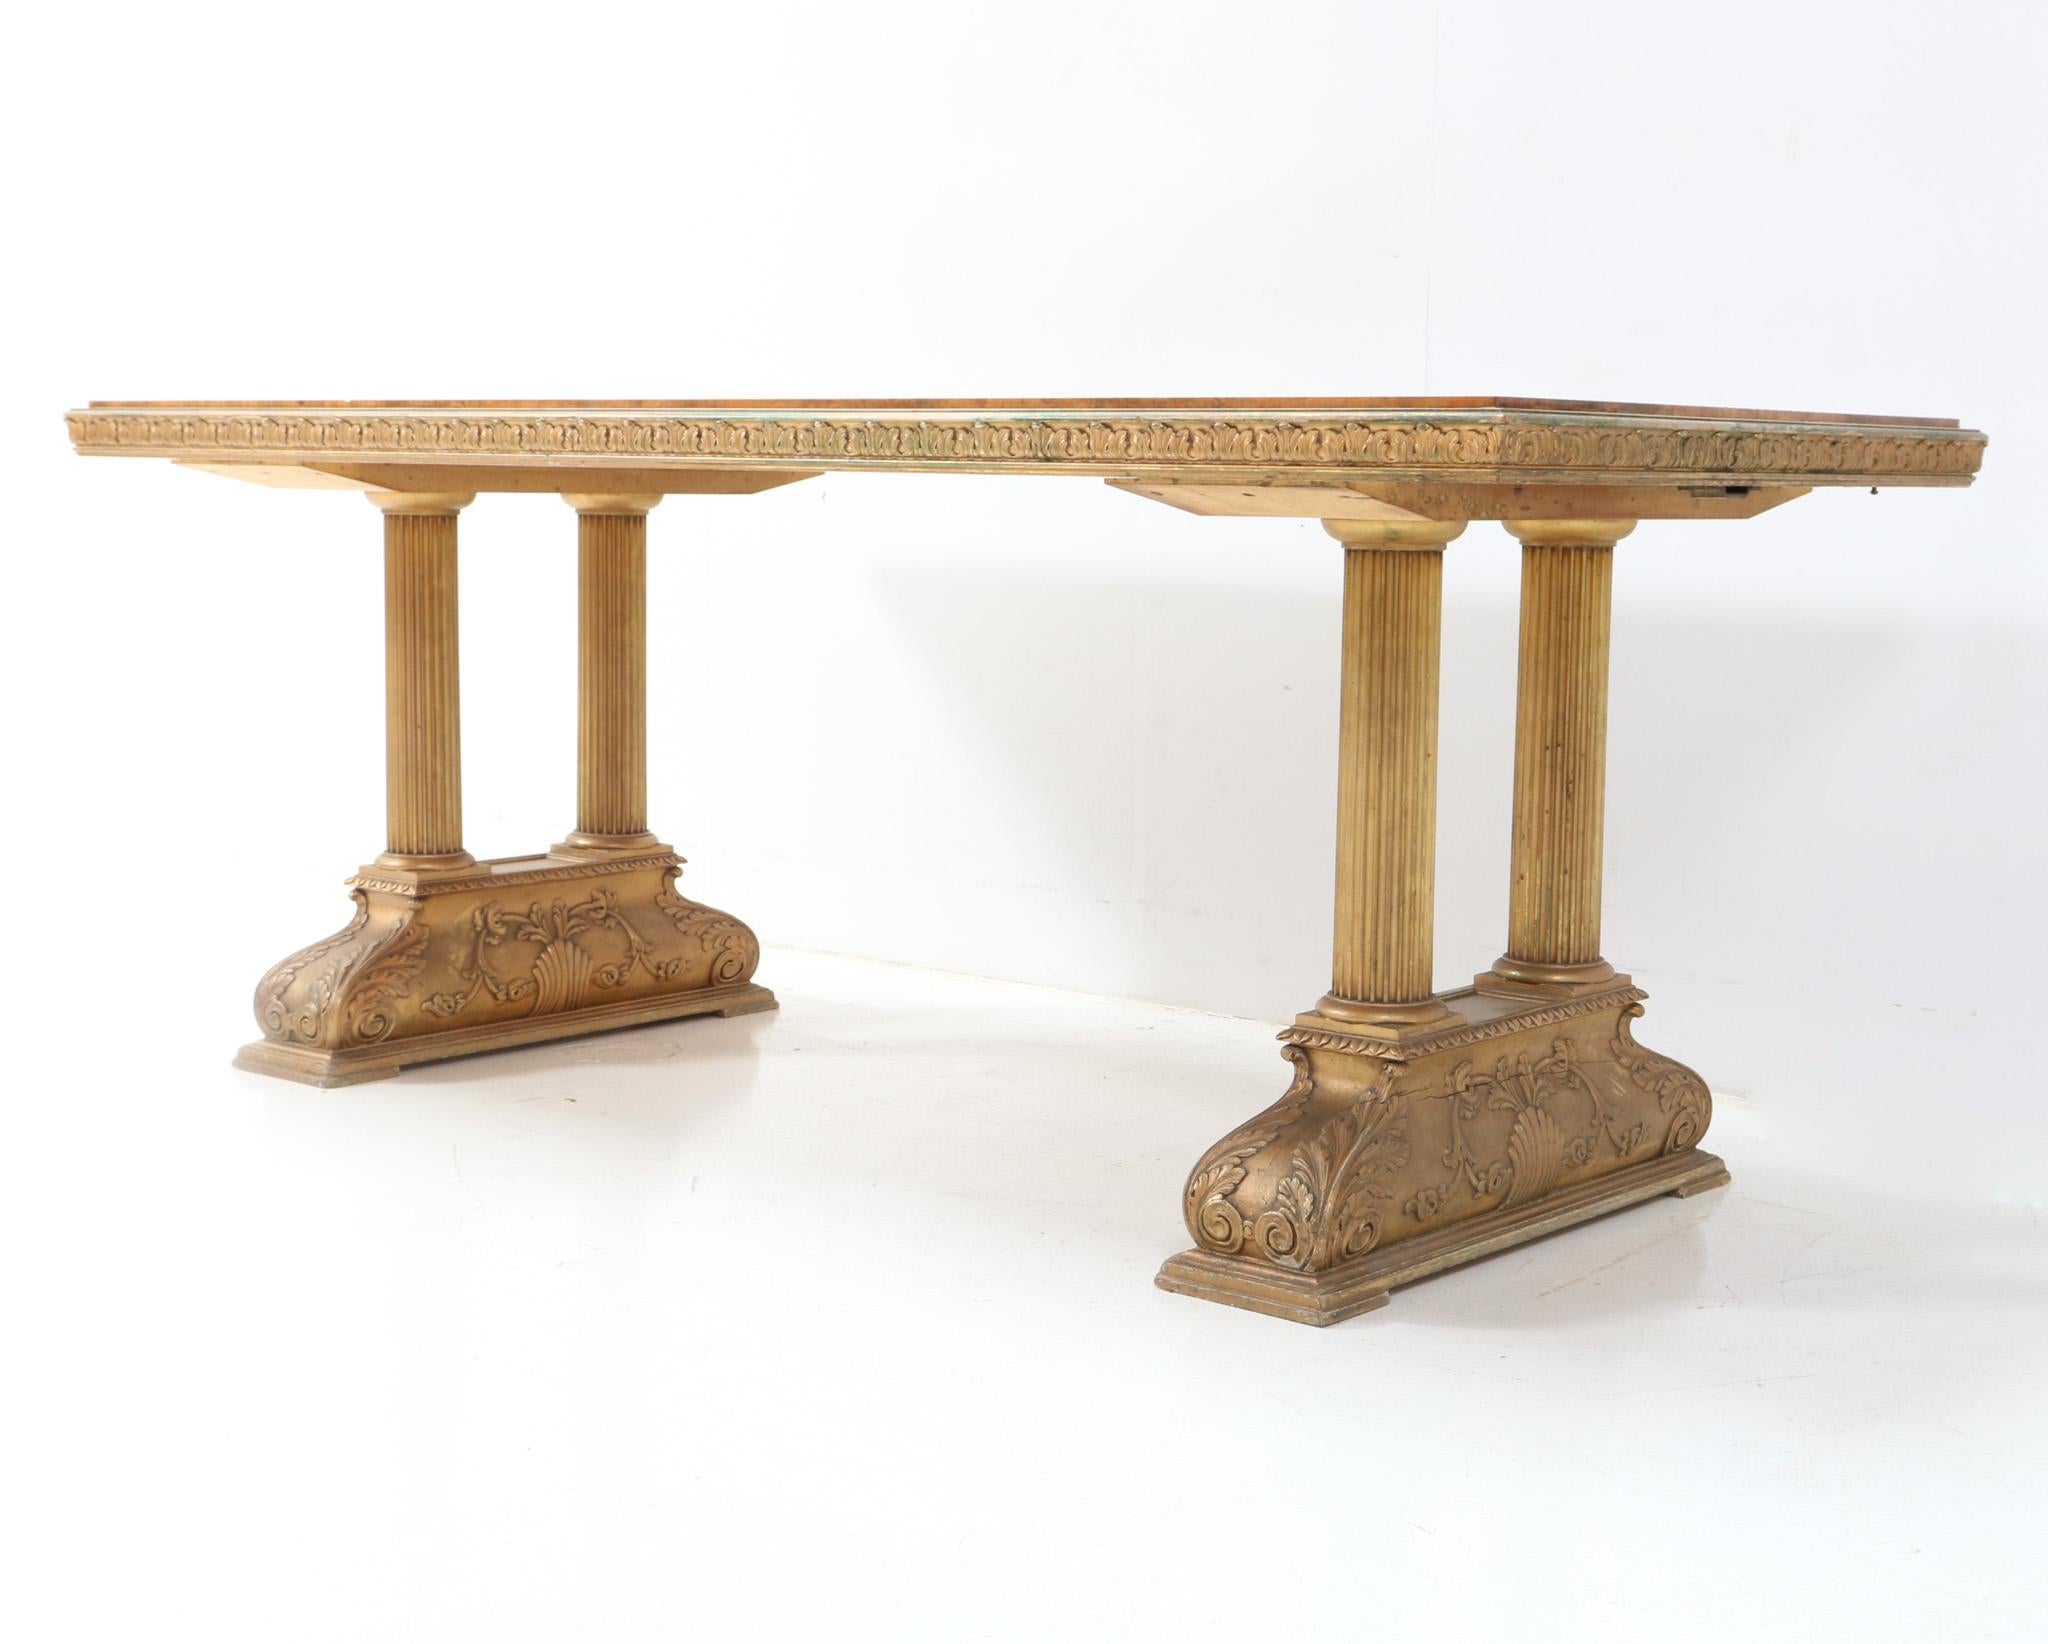 Gilt Dining Room Table Caesar by Axel Einar Hjorth with Original Extensions, 1920s For Sale